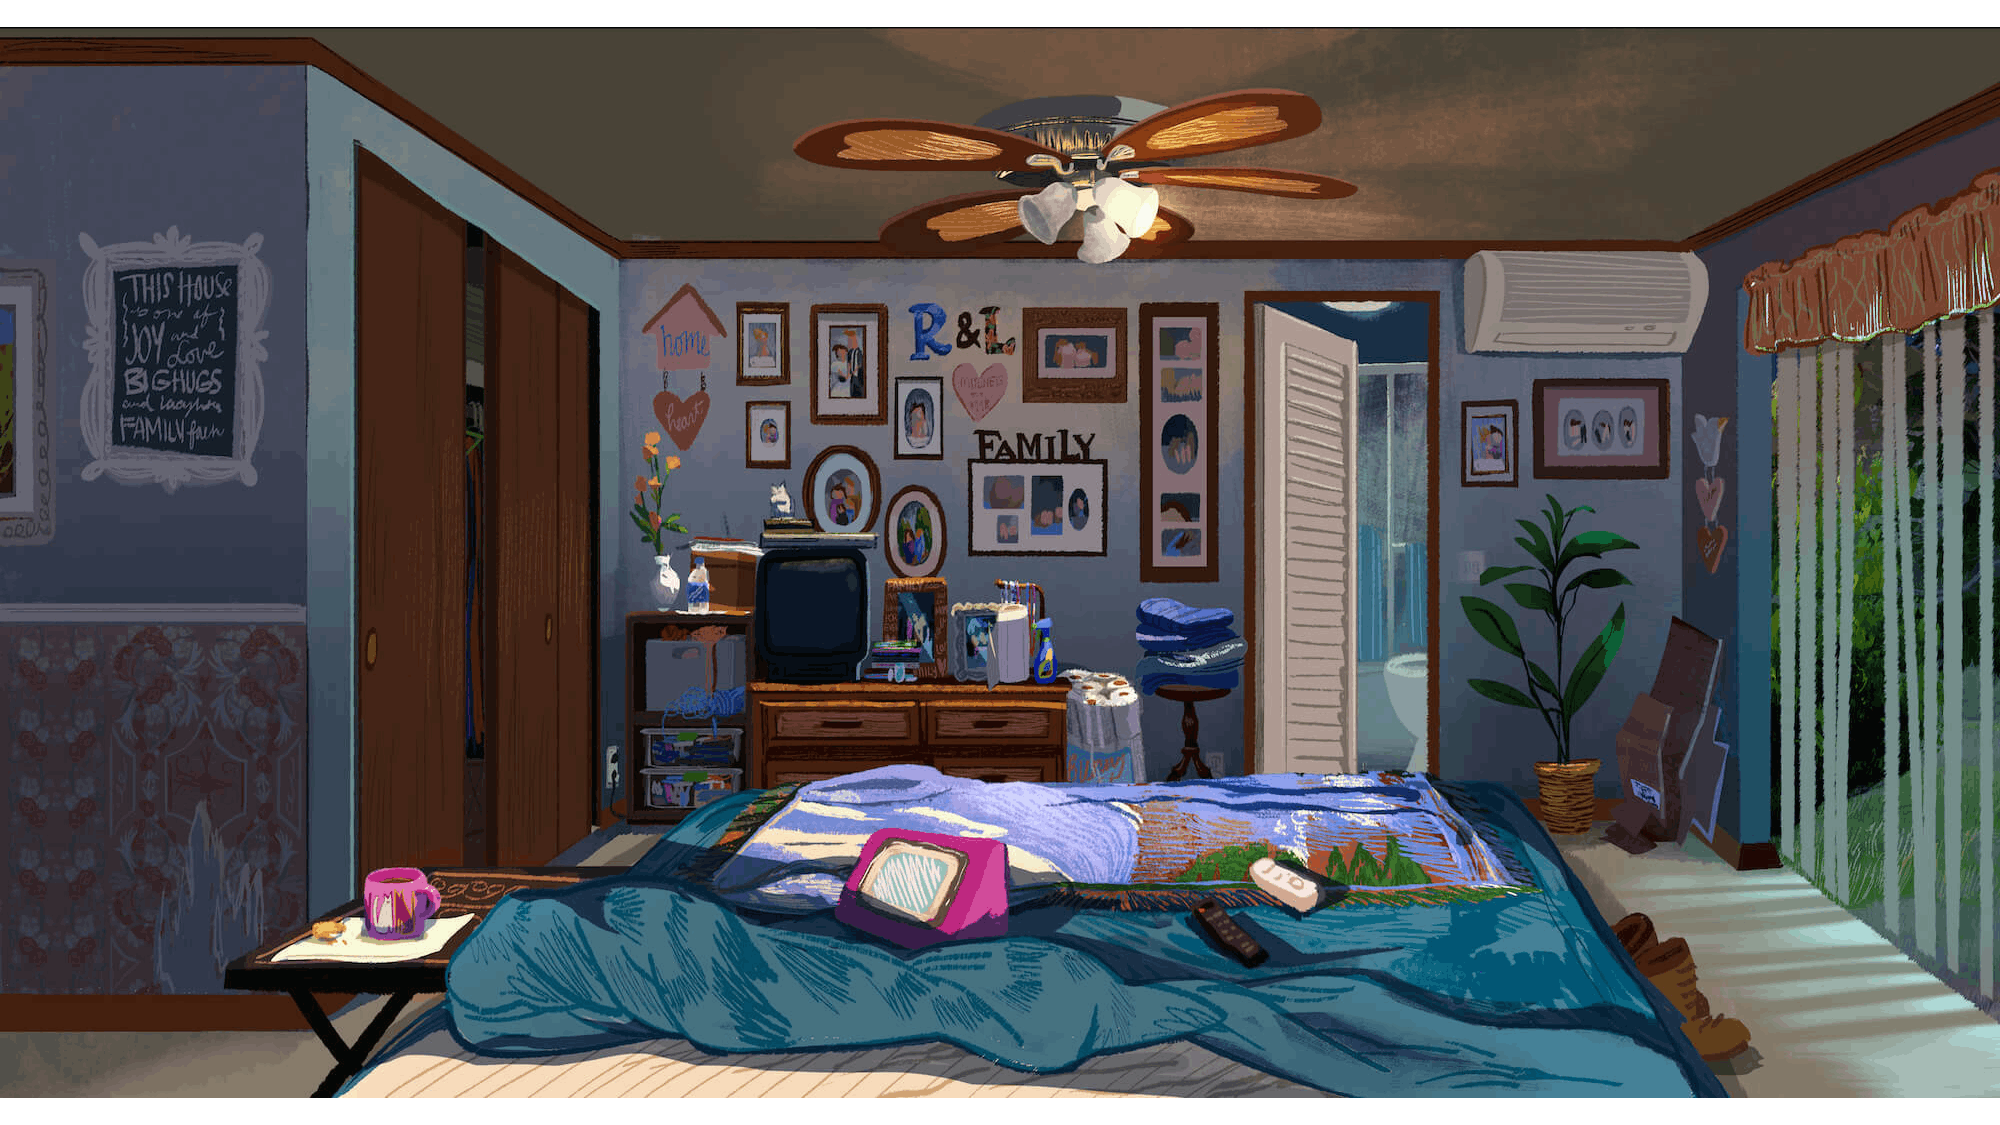 A bedroom from the perspective of the bed. There is a teal bed cover, brown boots, a potted plant, a fan, a wall air conditioner, a dresser on which sits a TV, and the walls are covered with picture frames. The details (a coffee mug on the bedside table) make this scene believable.